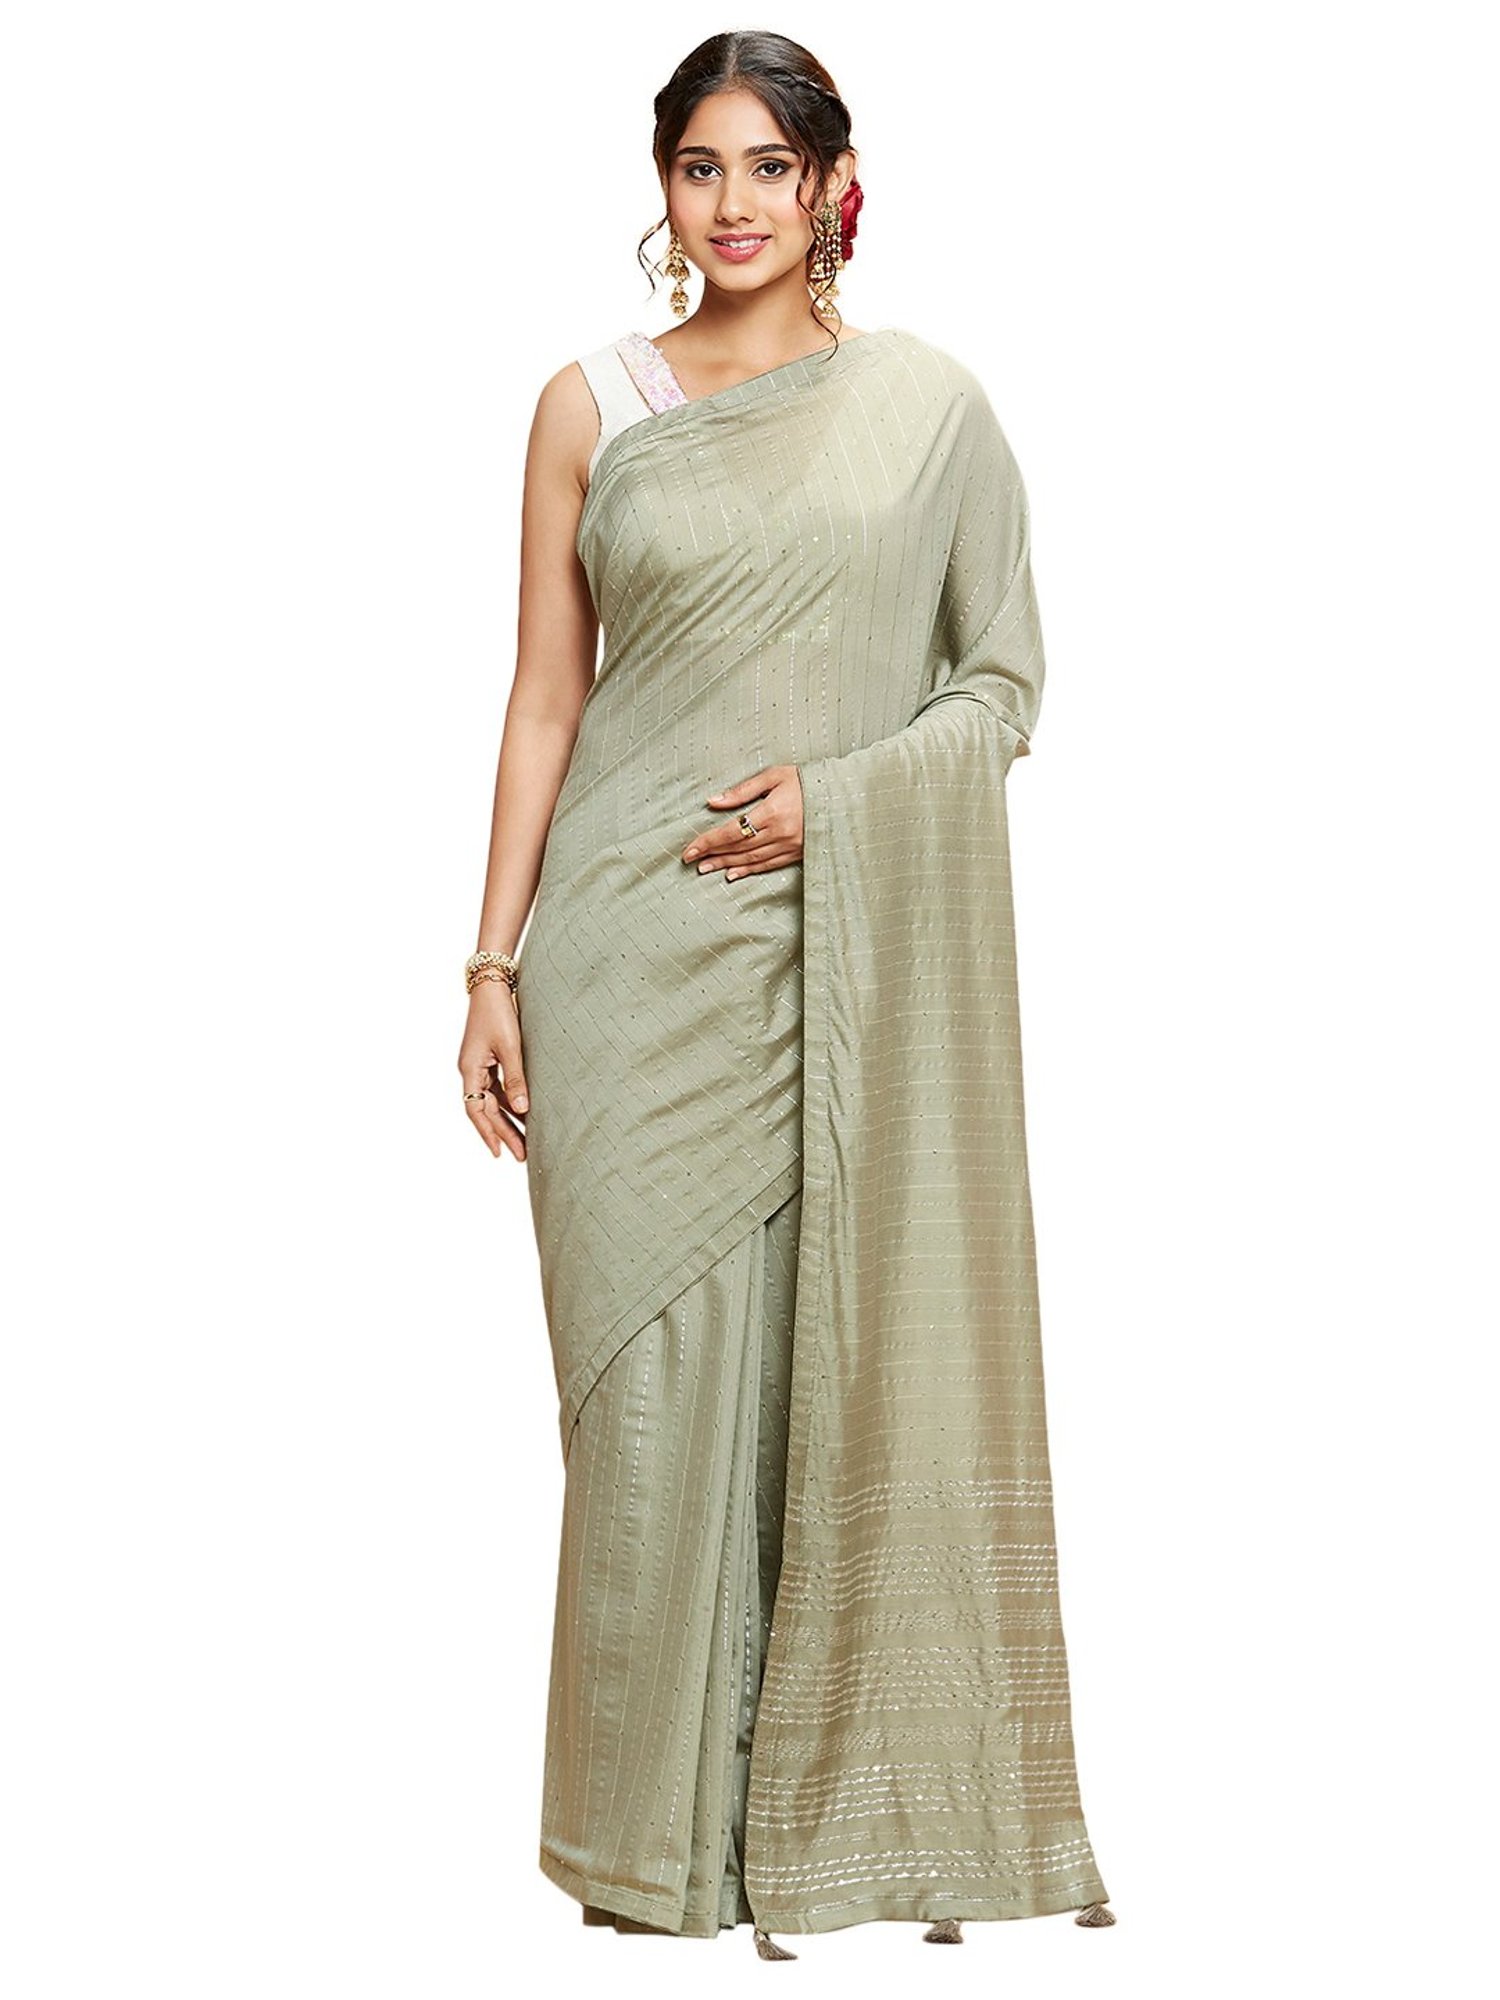 Pure Muslin Sarees for Women from navyāsa by Liva